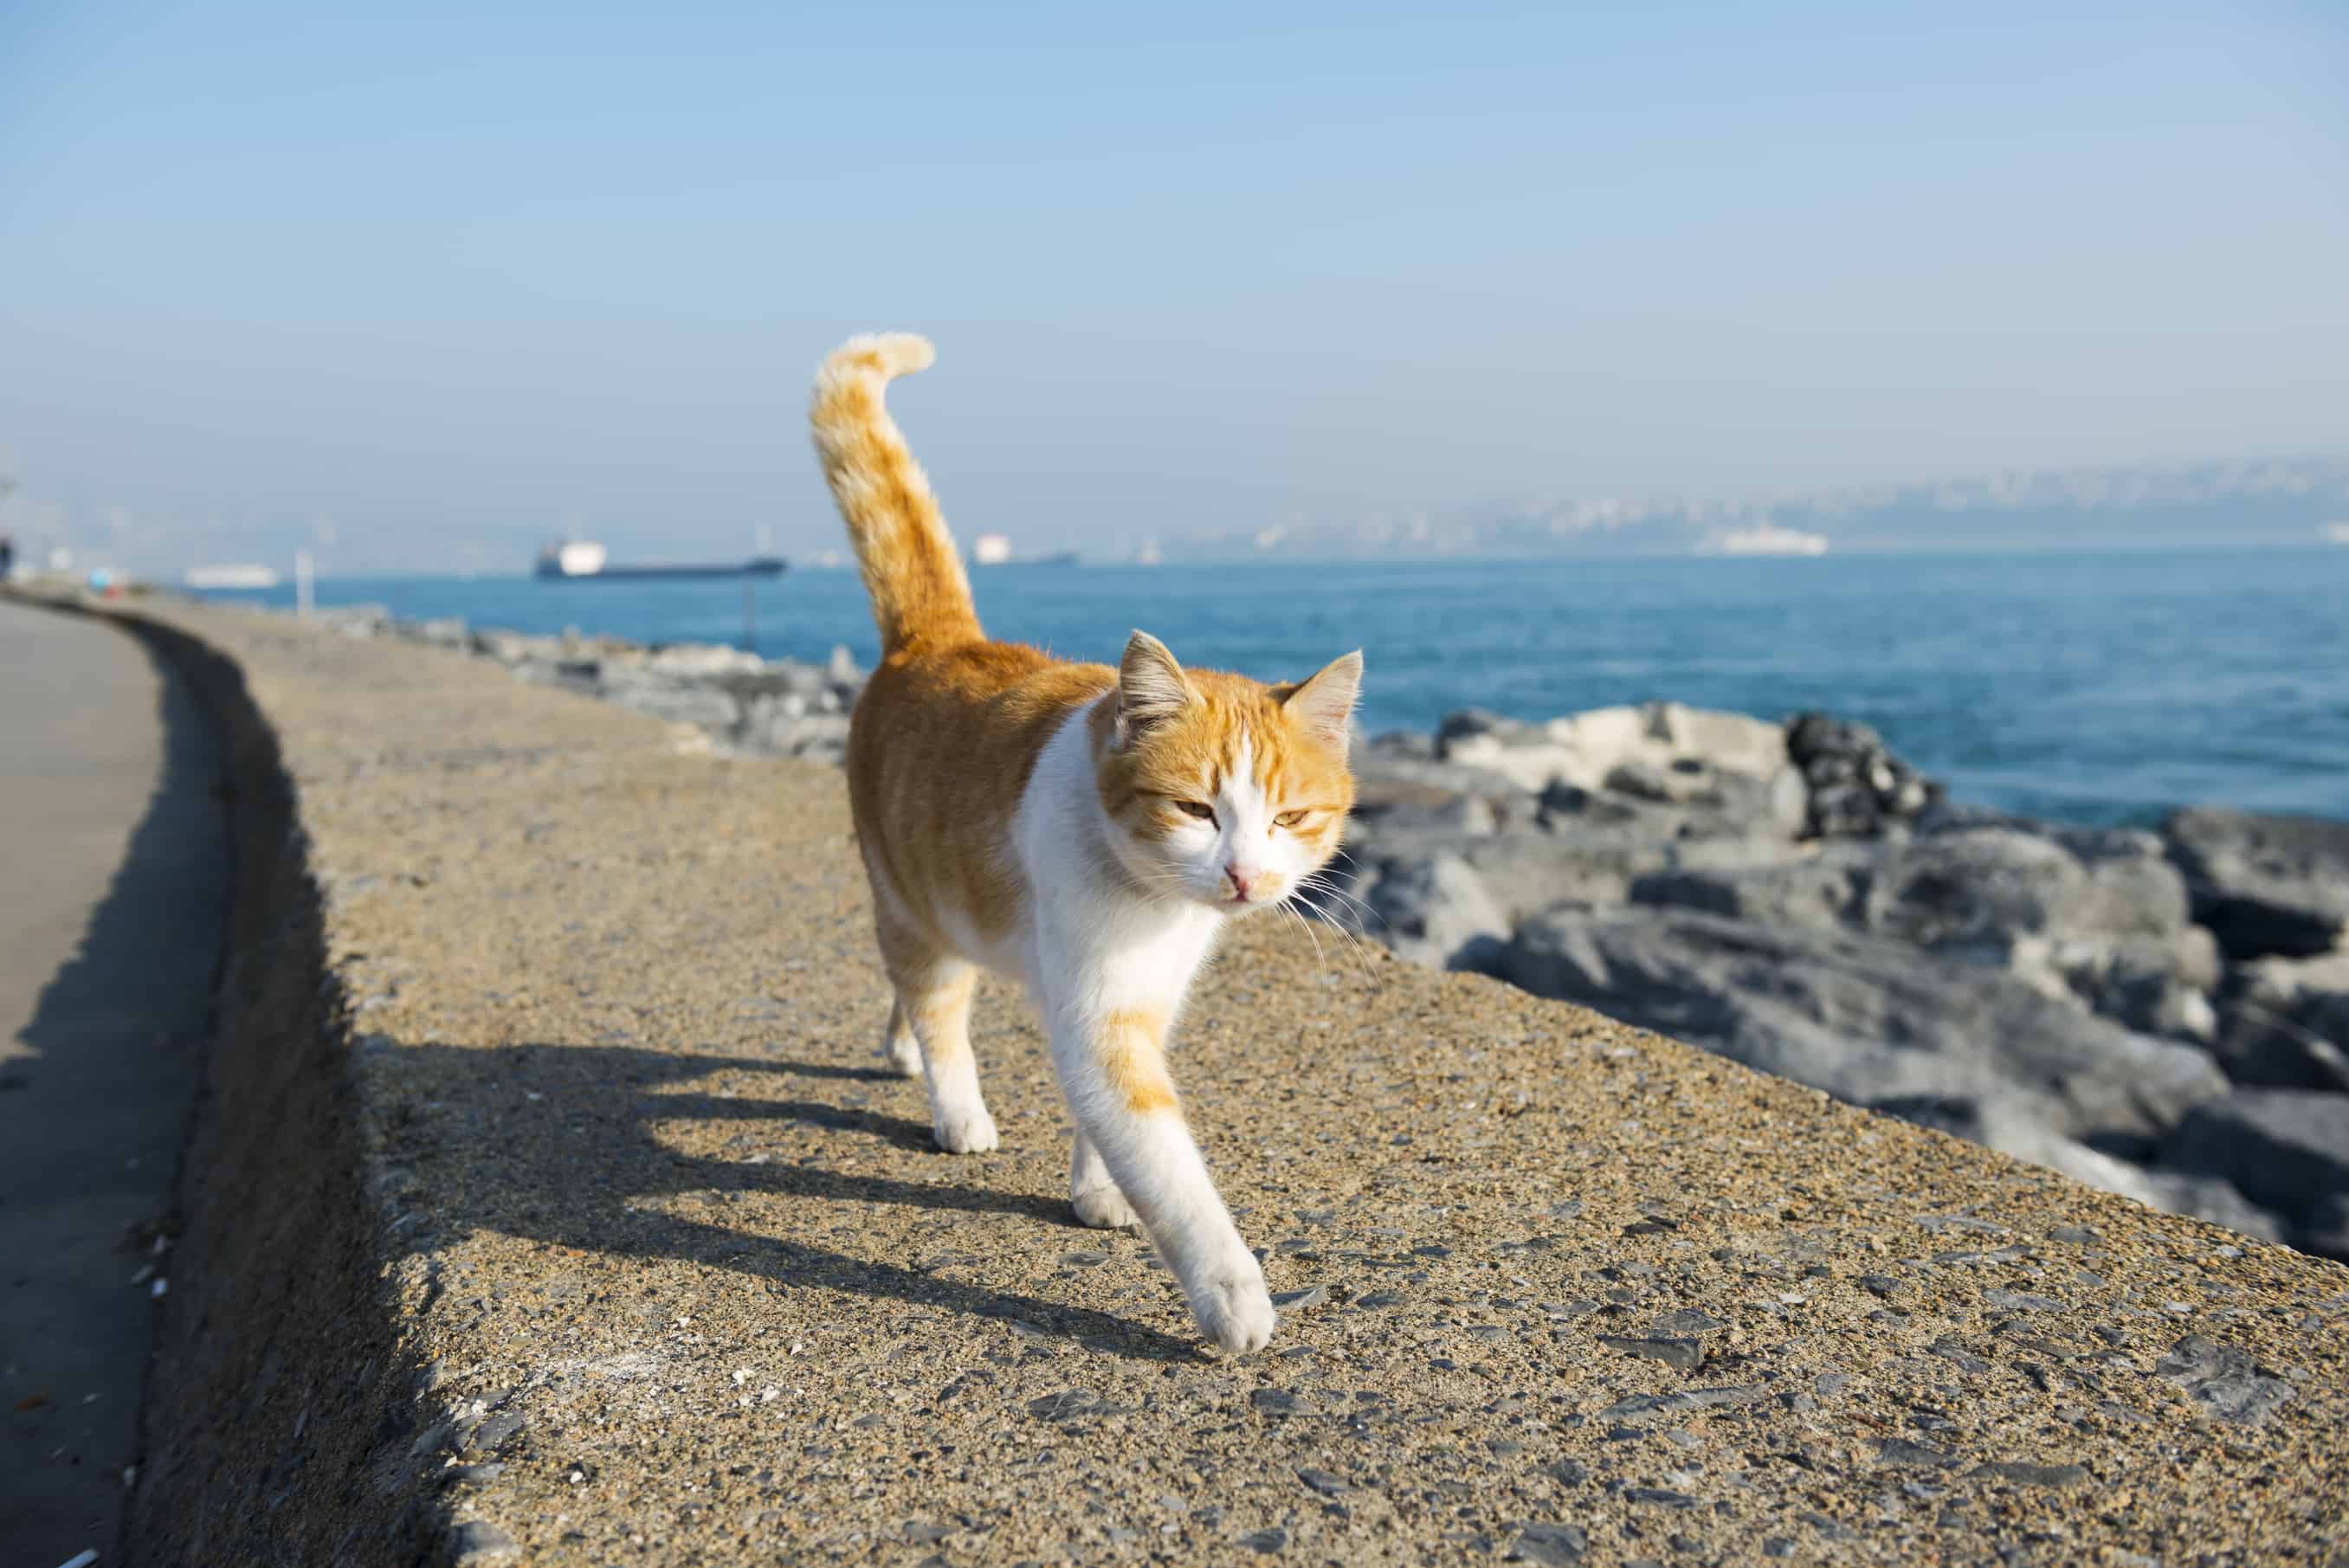 On the catwalk - cat in Istanbul, Turkey